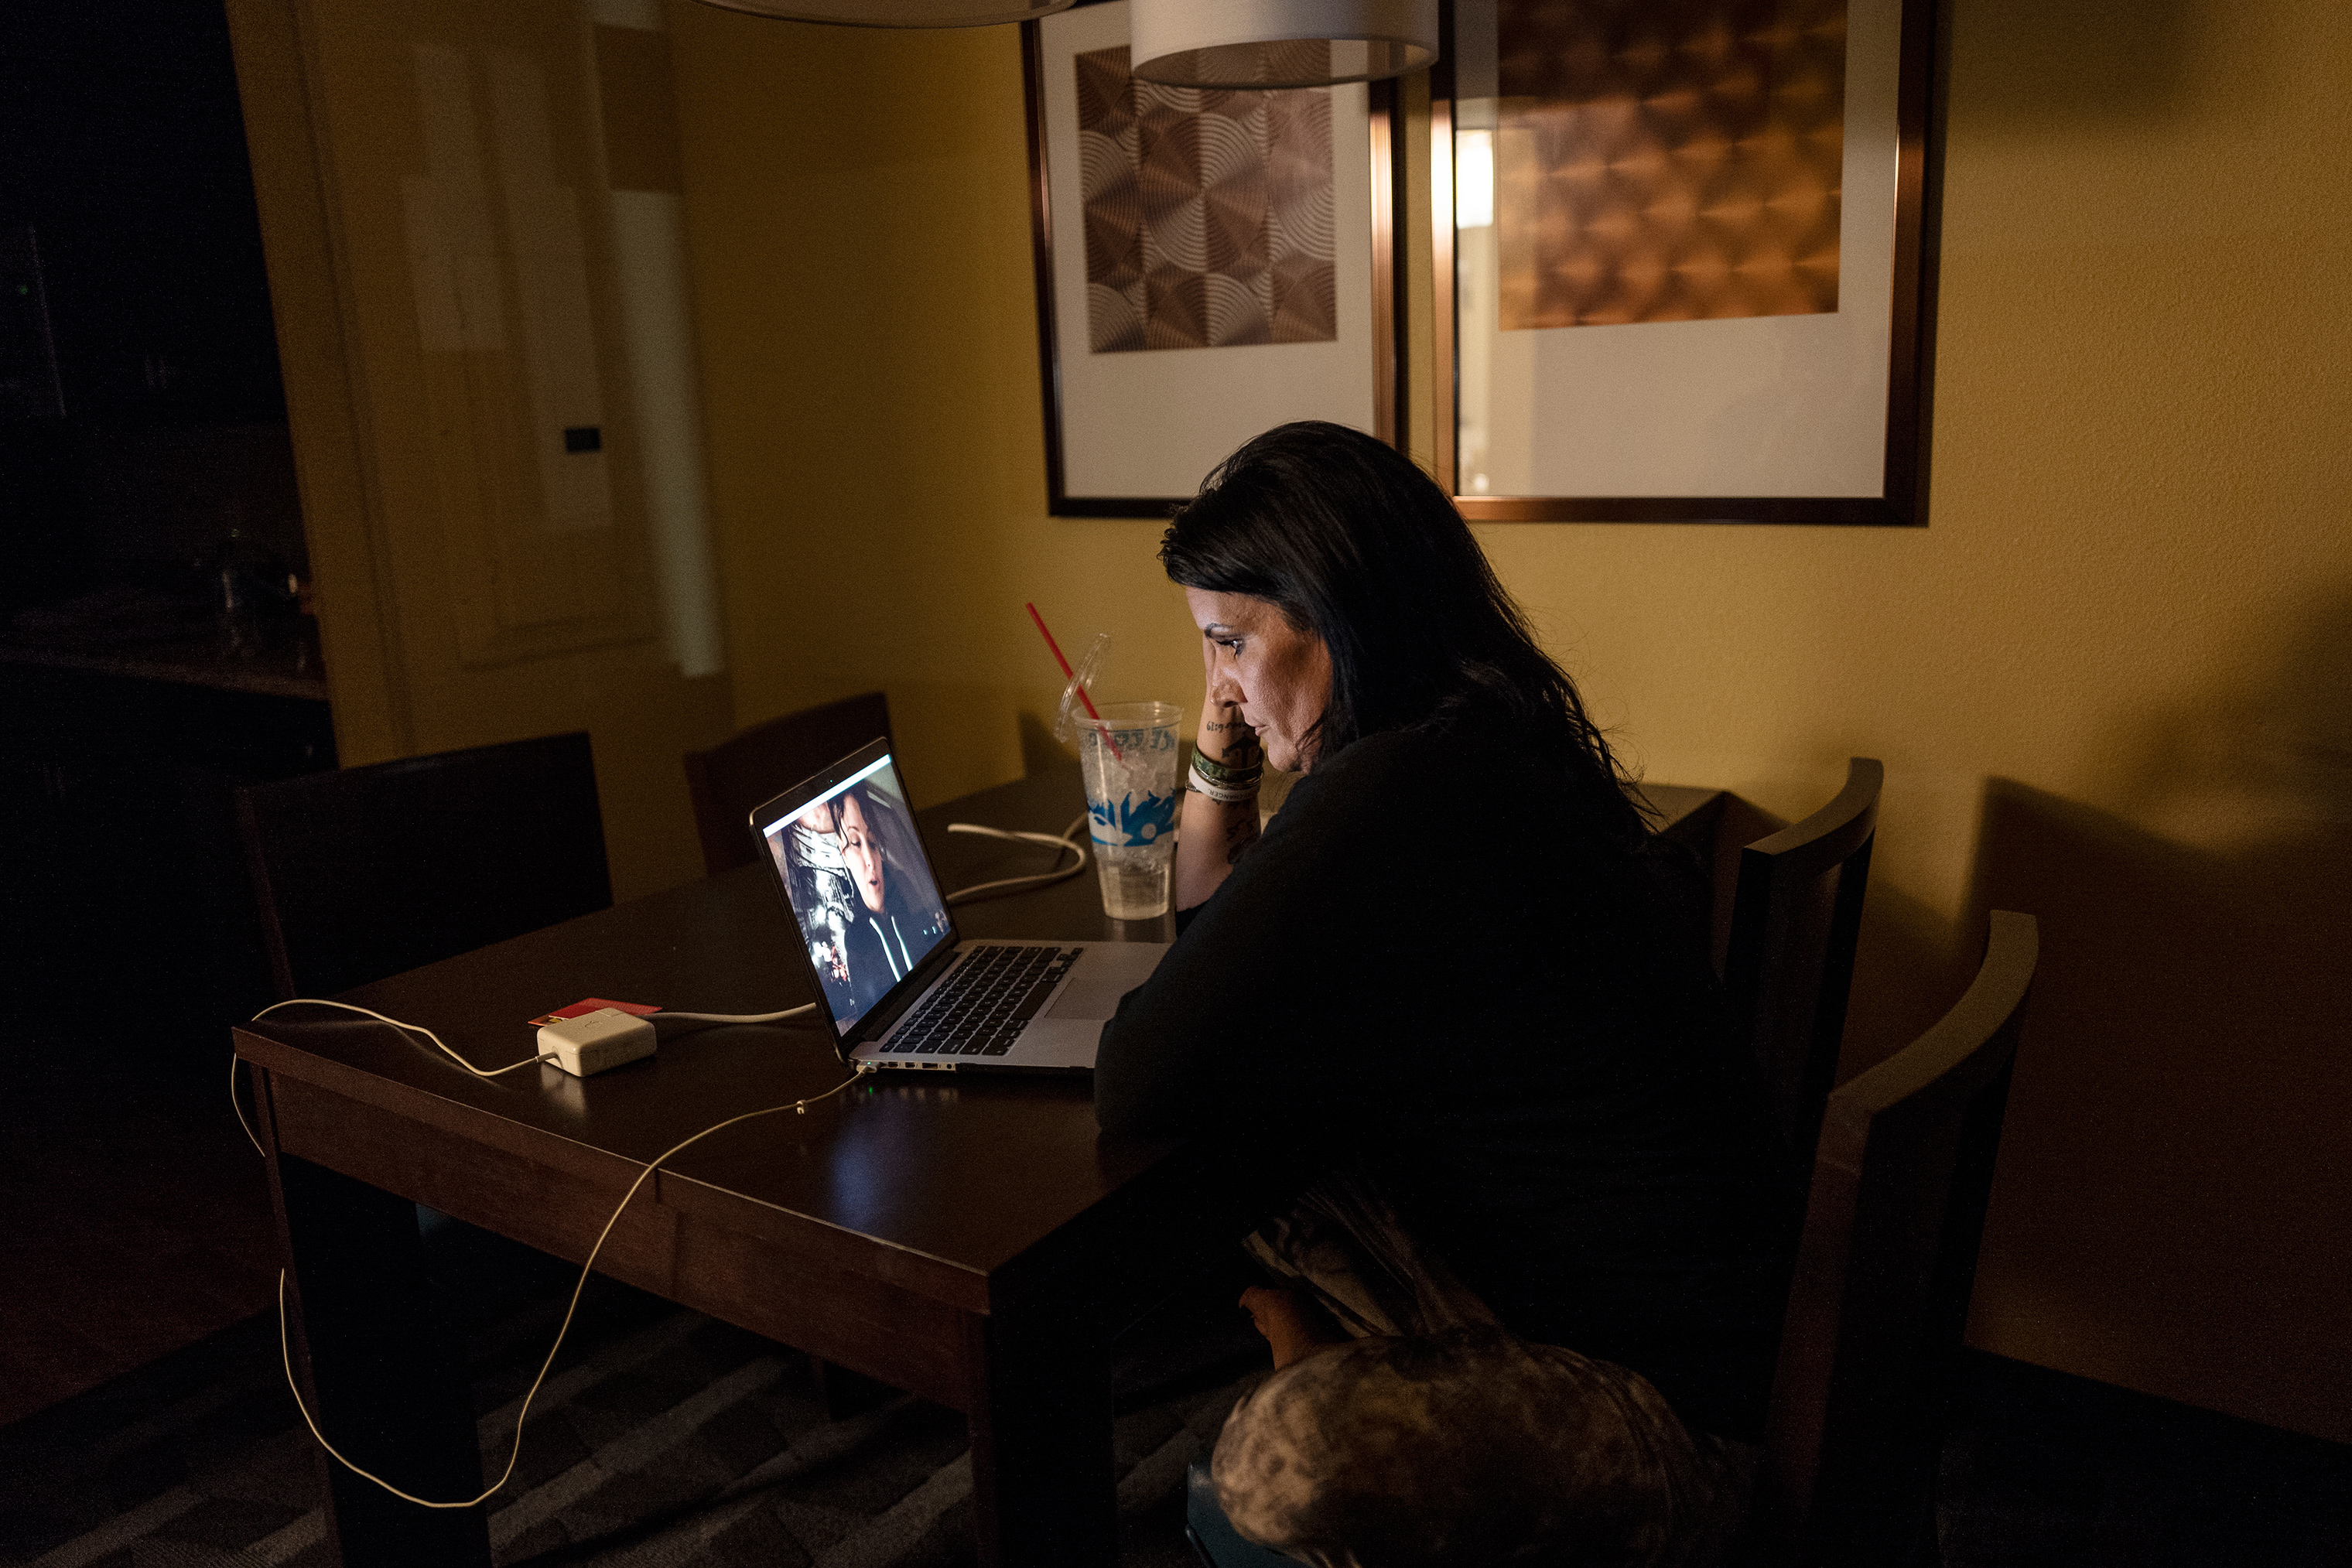 From her hotel room in North Dakota, Lazenko speaks with Adale, a human trafficking survivor in Utah, over Skype. Lazenko spends hours every day remotely helping women all over the US. (Lynsey Addario for TIME)